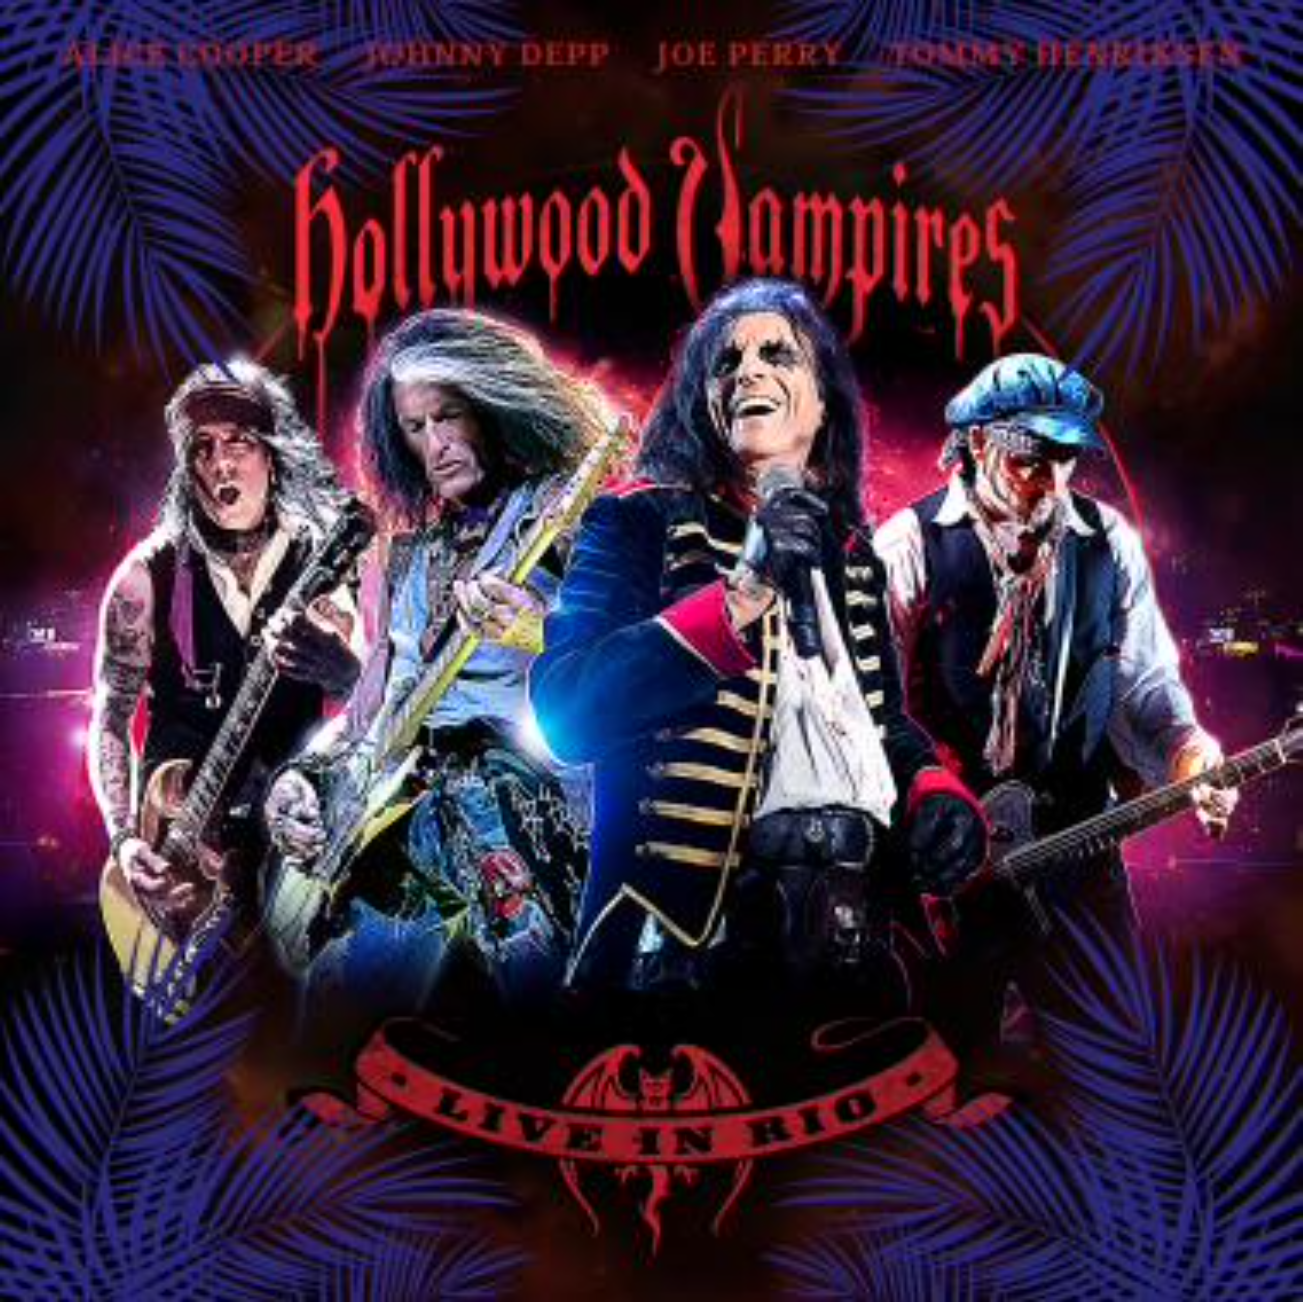 Hollywood Vampires Share "Manic Depression (Live In Rio)" Video